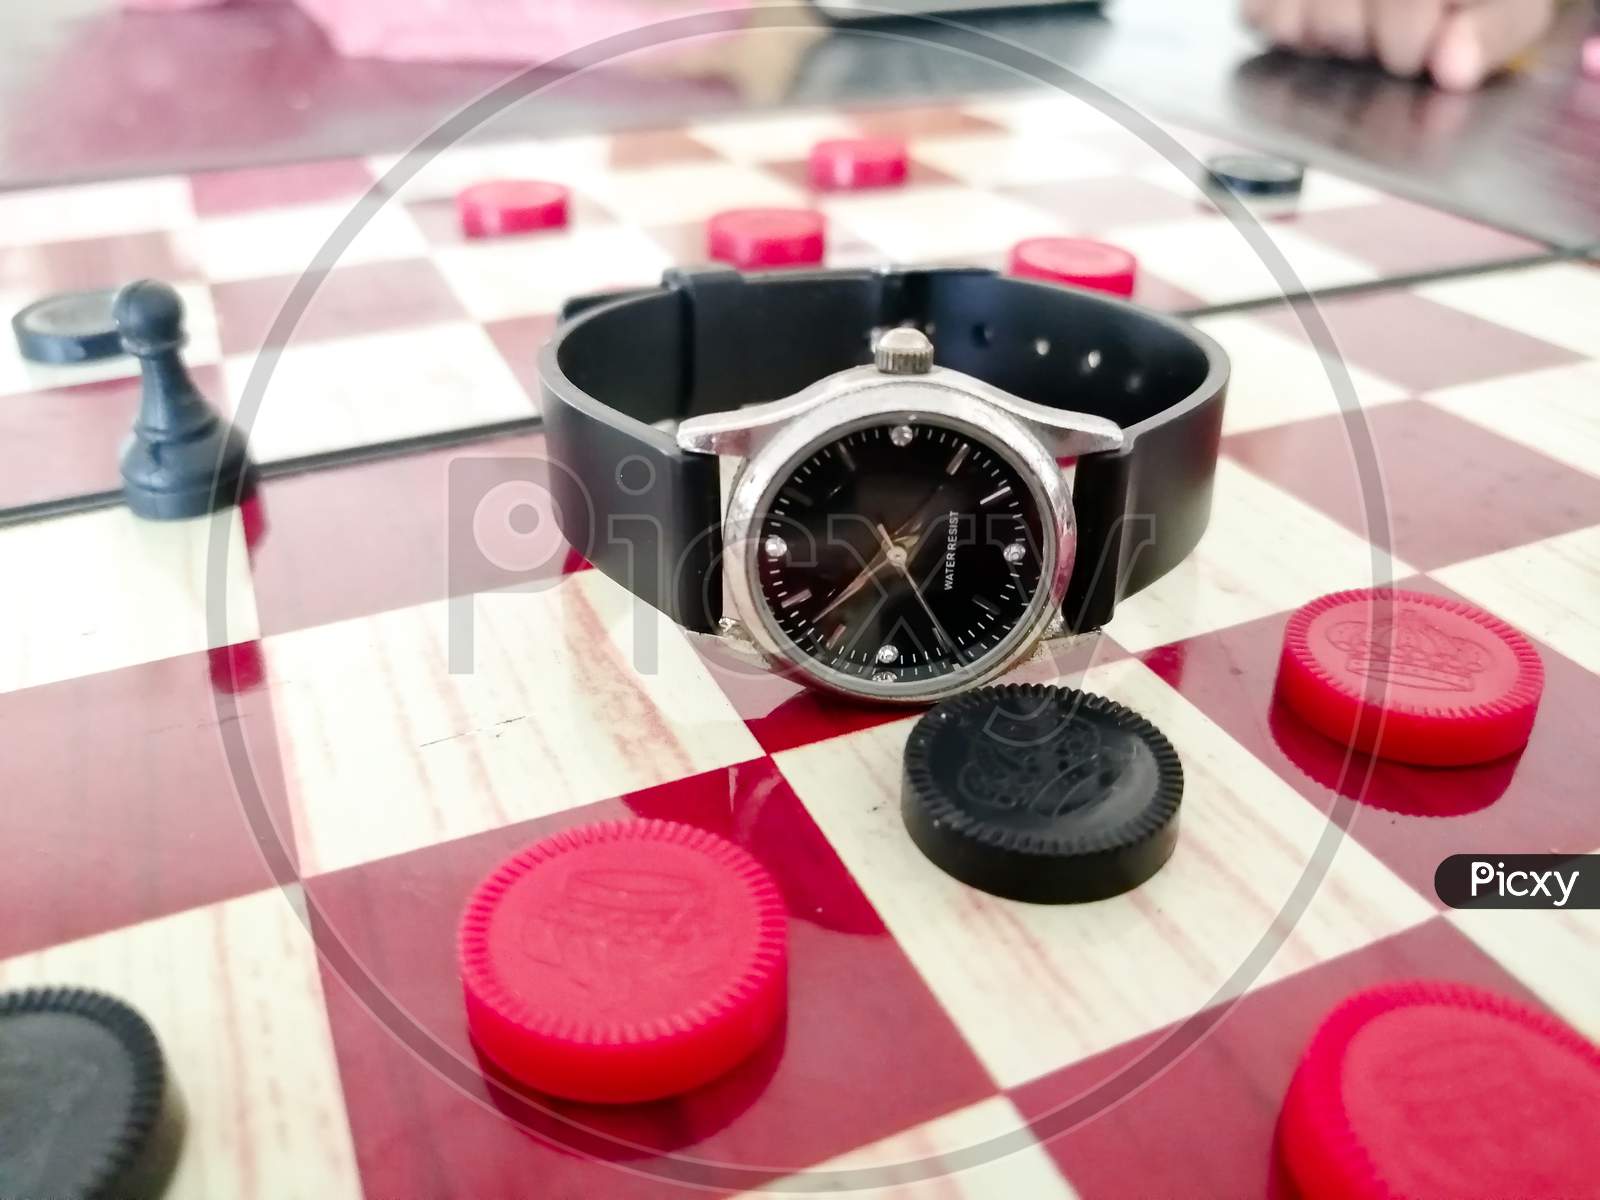 There Is A Ladies Wrist Watch On The Chess Board.